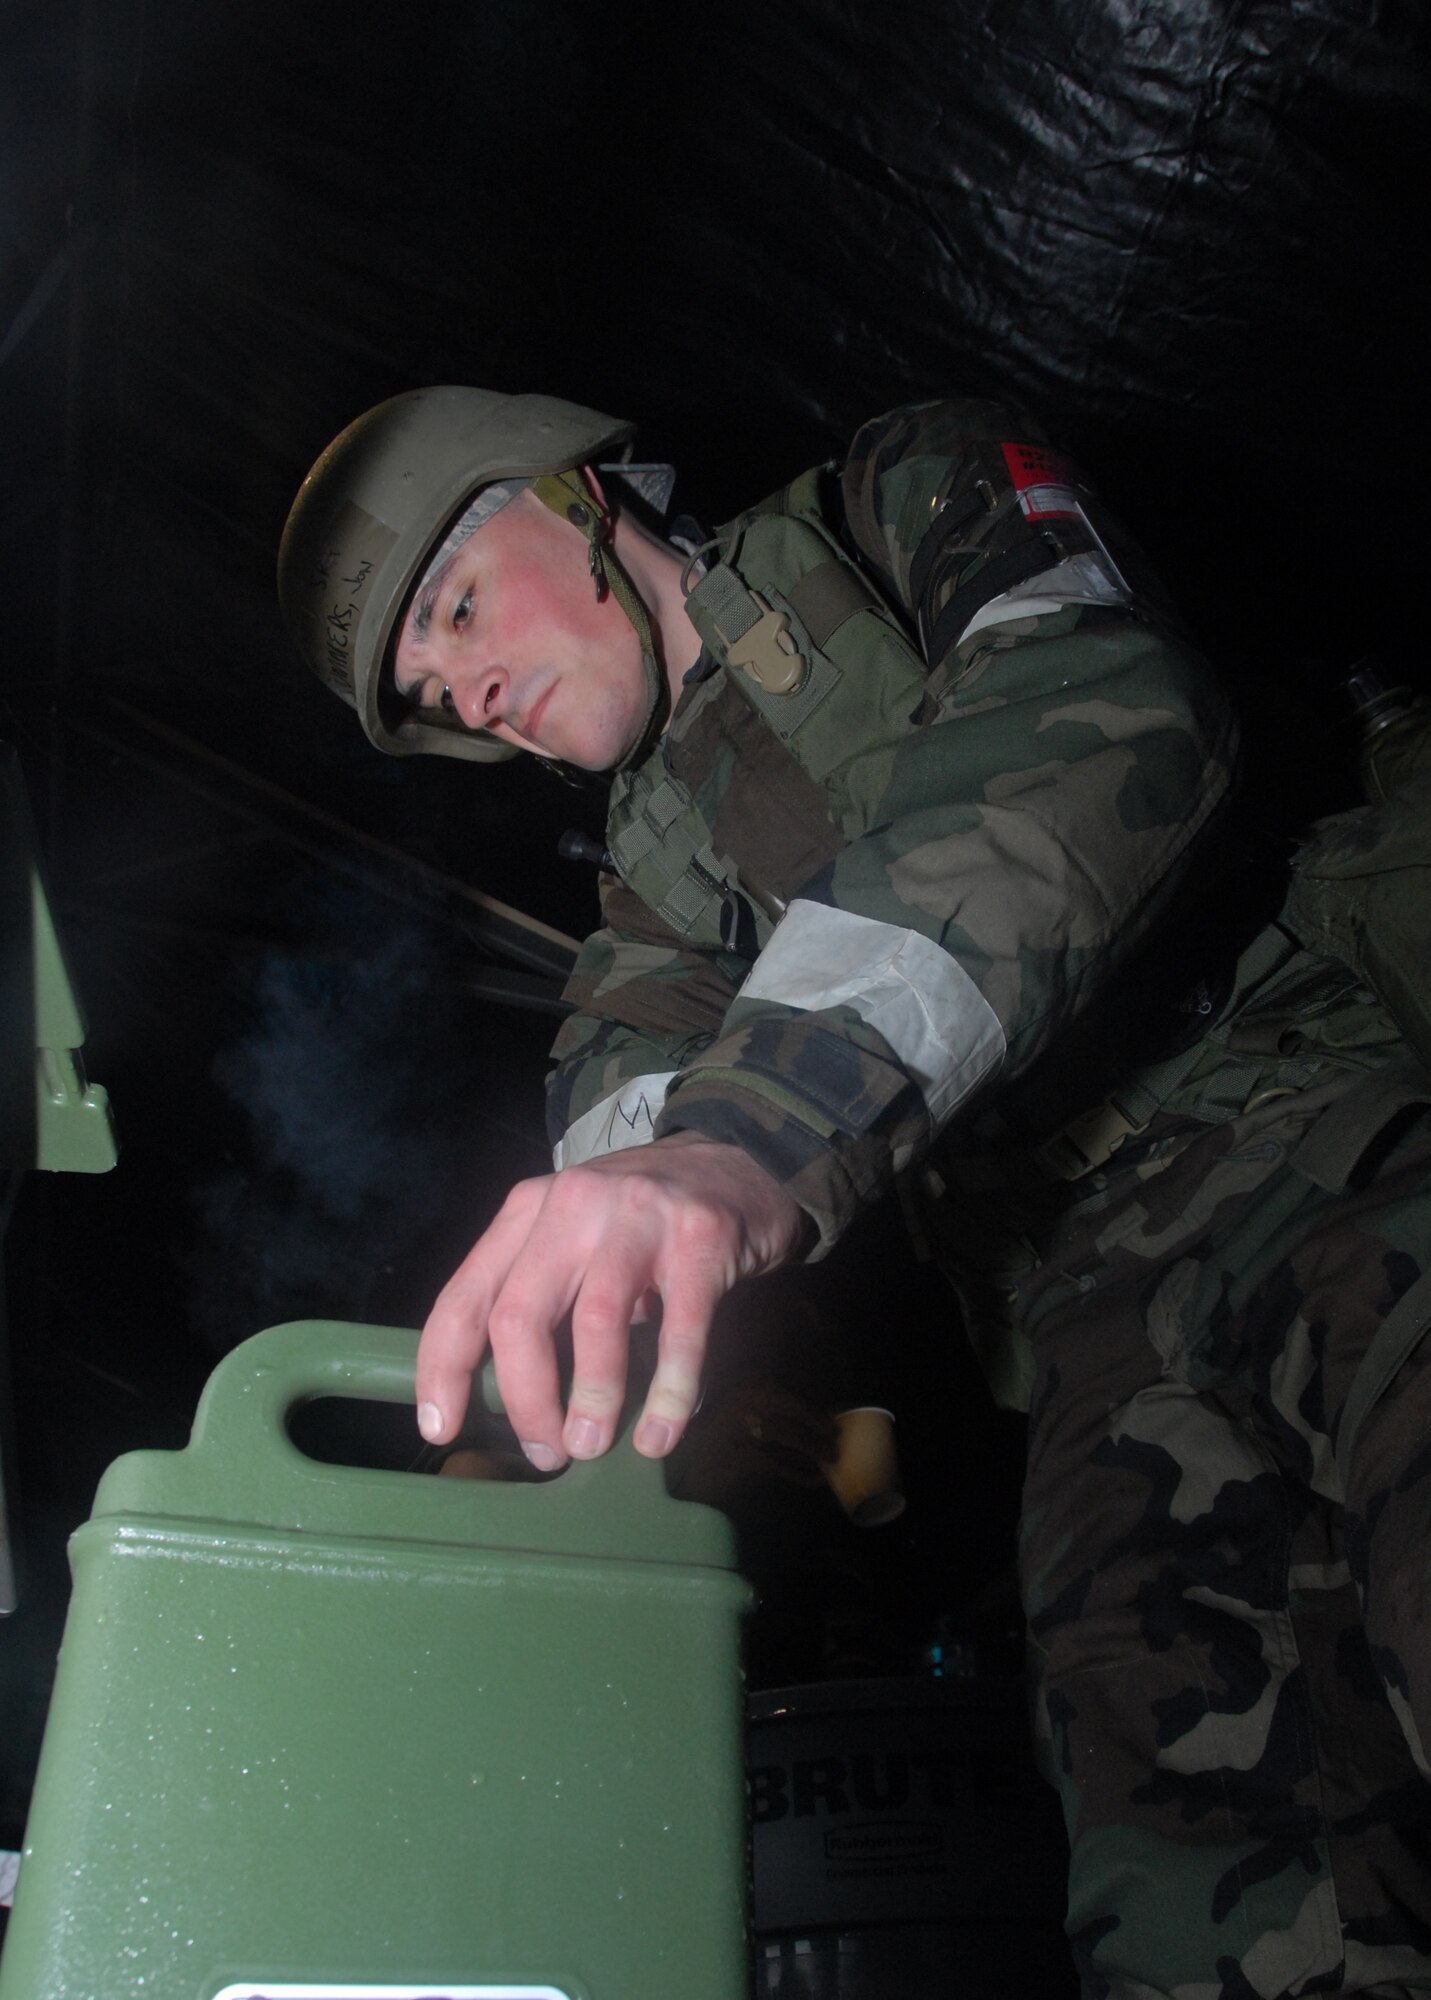 Air Force reservist, Senior Airman Jon Summers, a food-services journeyman with the 442nd Services Flight, prepares grape drink for fellow reservists during an operational-readiness exercise at Whiteman Air Force Base, Mo. The flight's parent unit, the 442nd Fighter Wing, is an Air Force Reserve A-10 Thunderbolt II unit based at Whiteman. (US Air Force photo/Master Sgt. Bill Huntington)